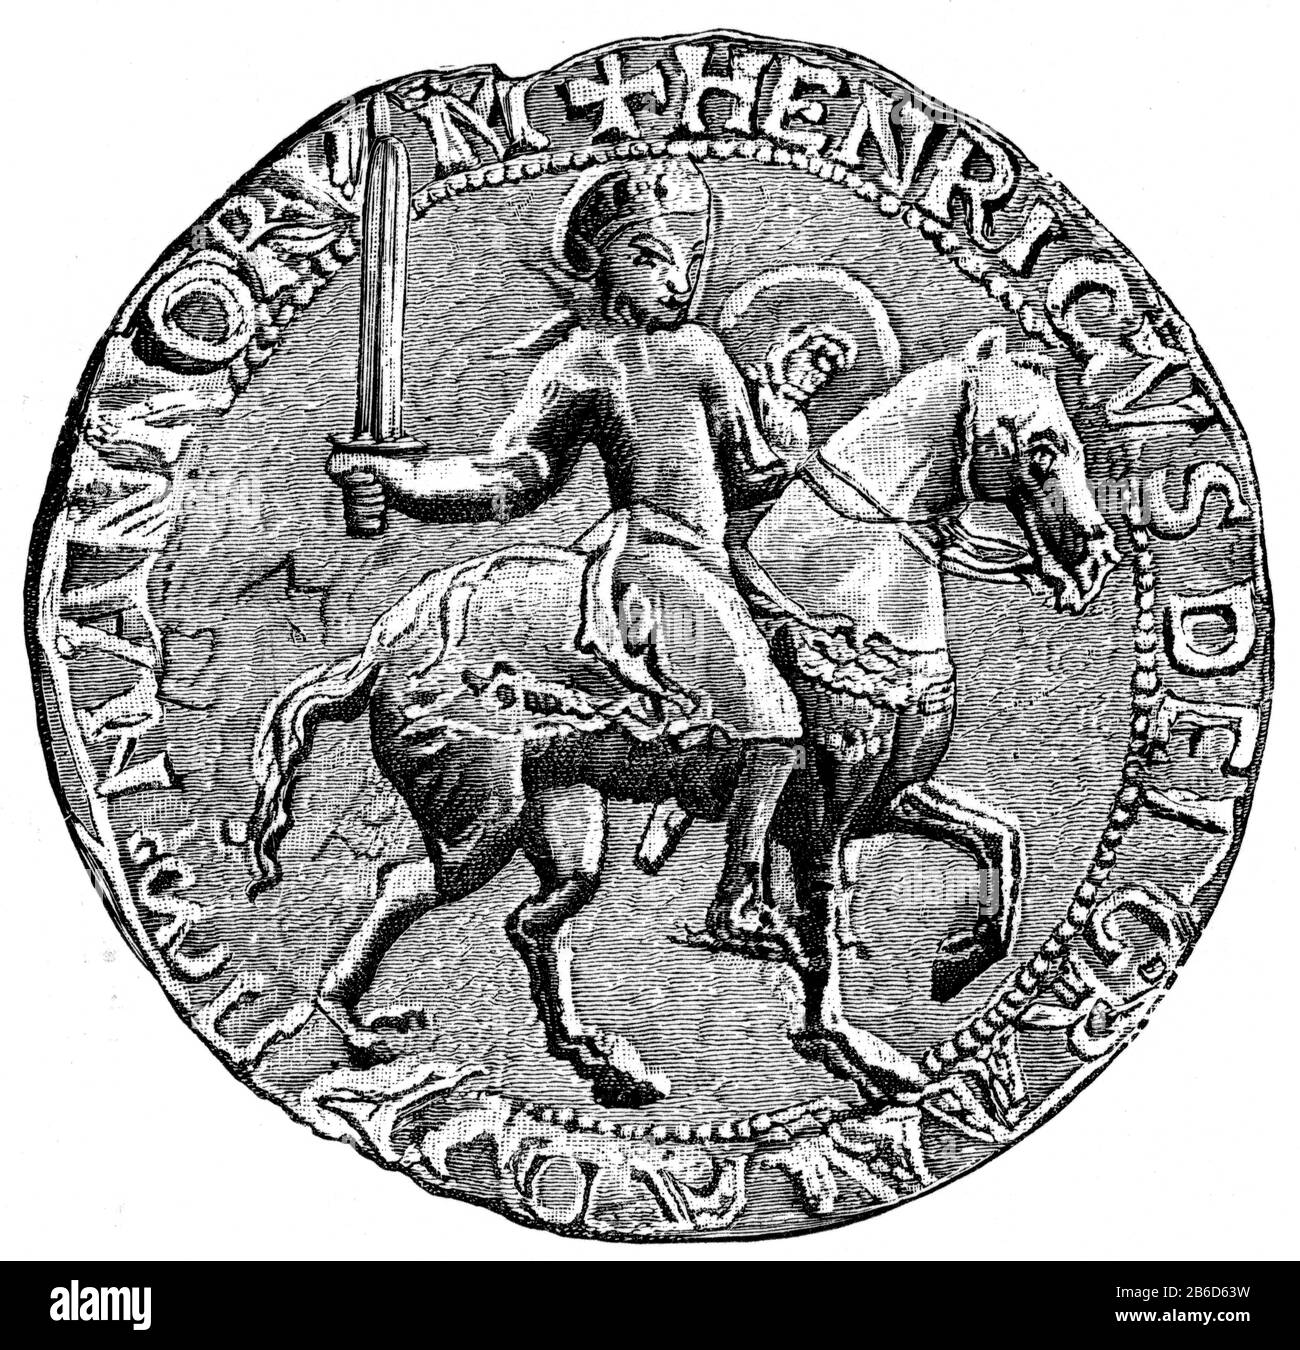 Great Seal of Henry I. The seal of Henry I (c1068-1135), aka Henry Beauclerc, King of England from 1100 to his death in 1135. Stock Photo